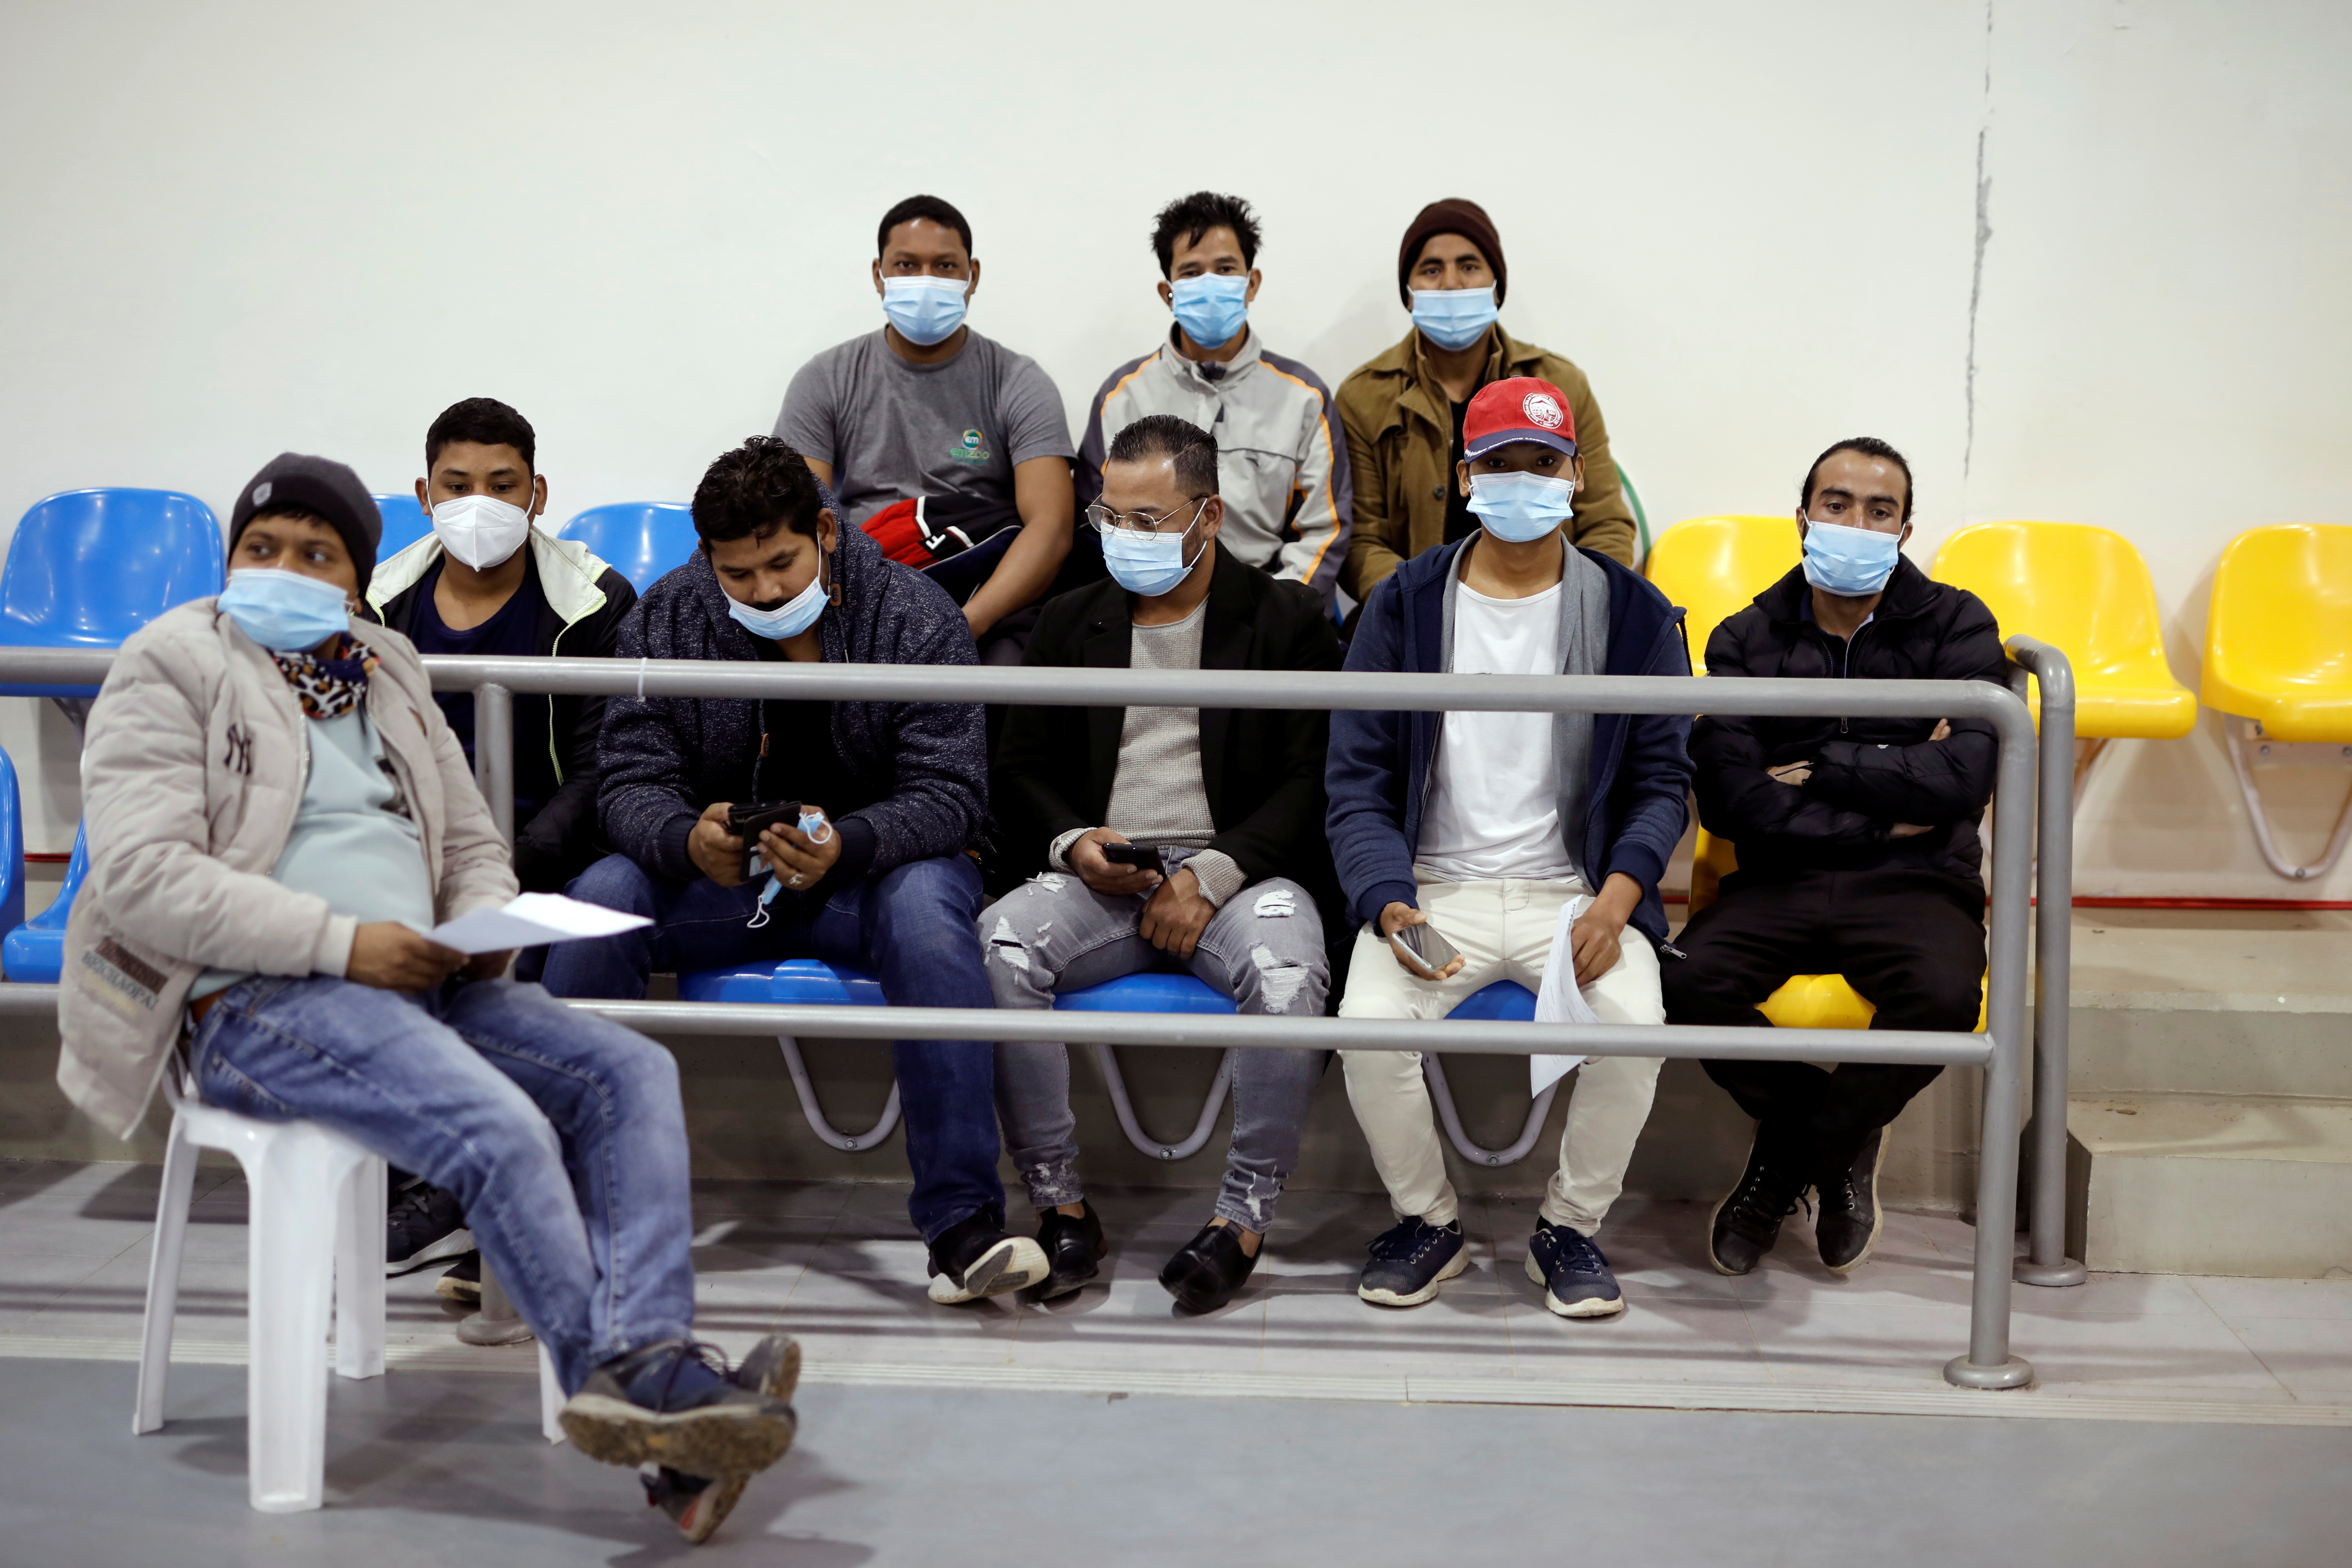 A group of agricultural workers from Nepal wait after receiving a vaccination against the coronavirus disease (COVID-19) at a temporary Clalit healthcare maintenance organisation (HMO) centre, at a sports hall in Netivot